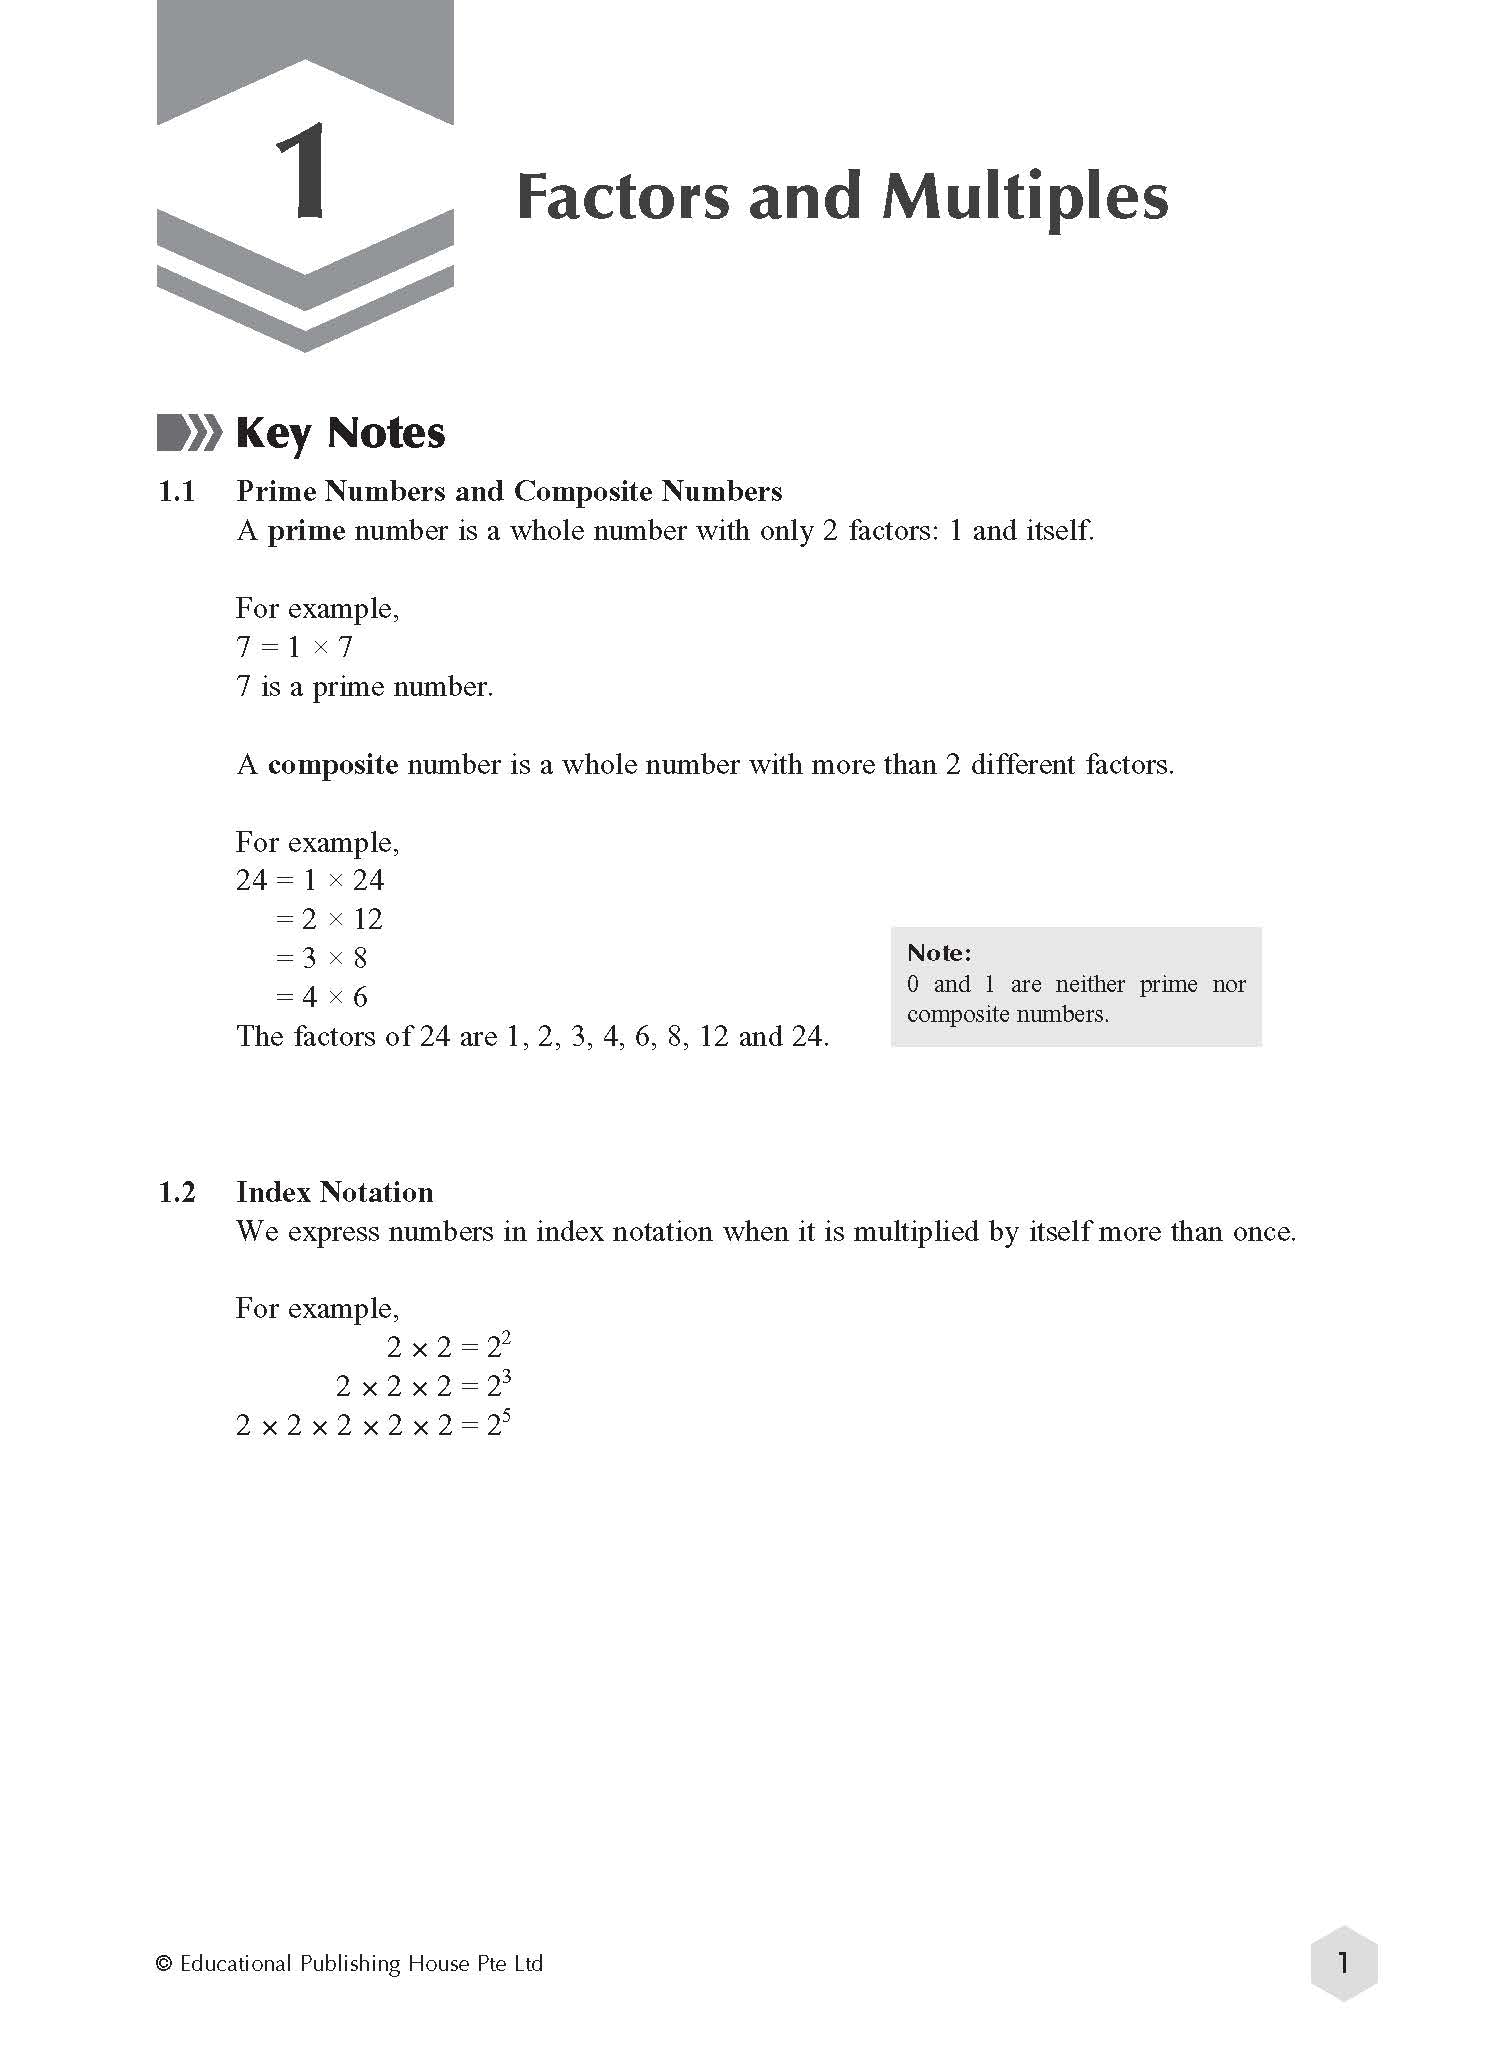 Secondary 1 Mathematics Topical Tests (Exp)